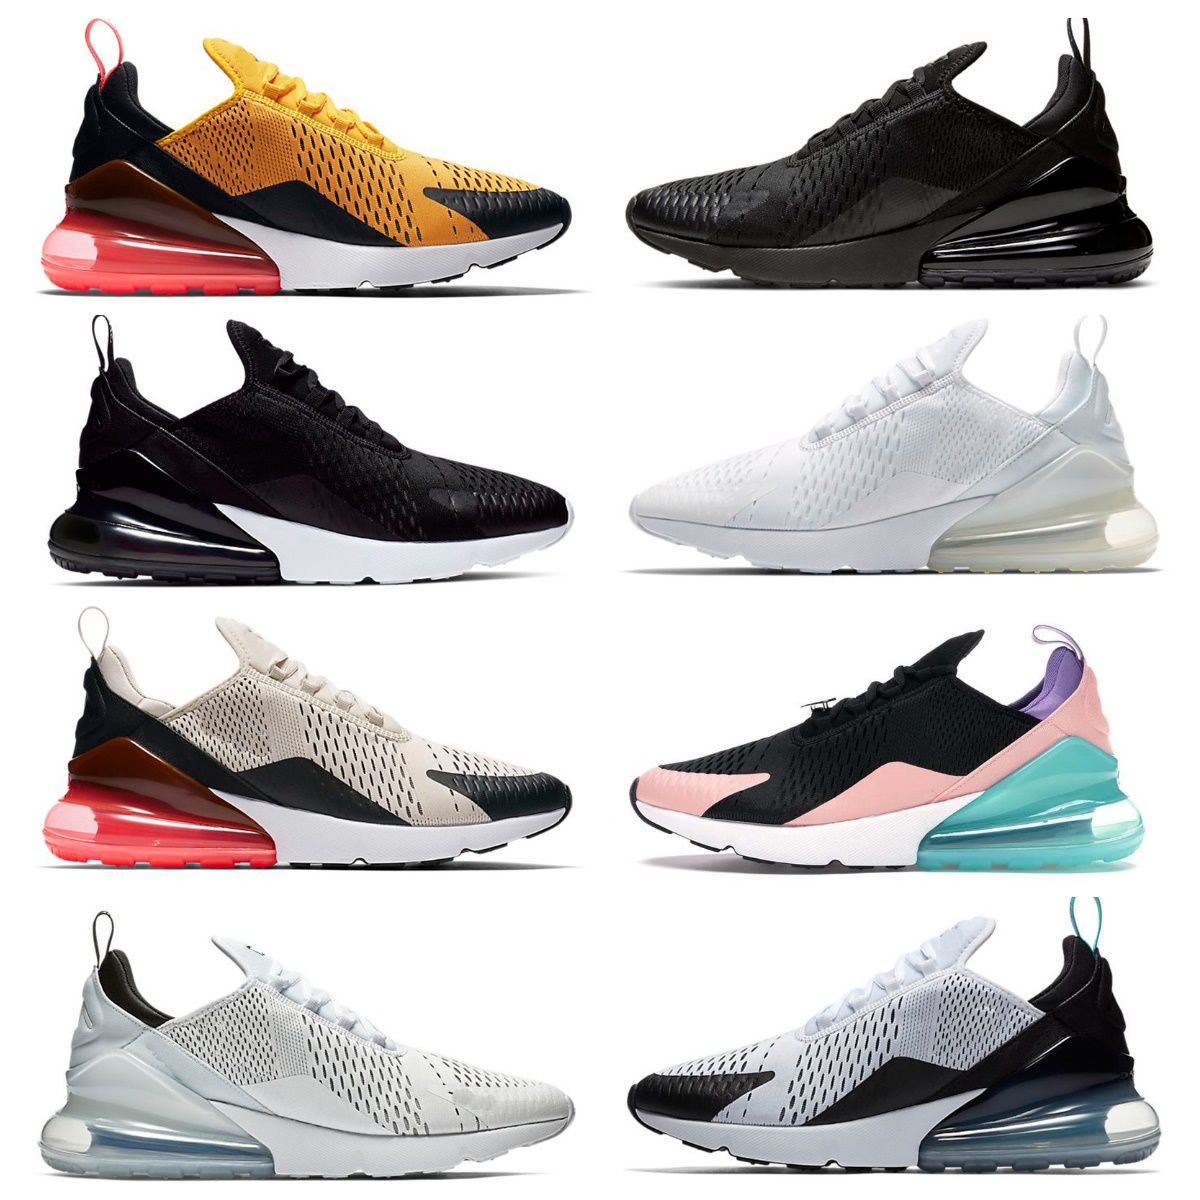 

270s men woman running shoes 270 Triple White Black Oreo Barely Rose Dusty Cactus Photo Blue University Gold Neon Green airs mens trainers womens sports sneakers, Bubble package bag